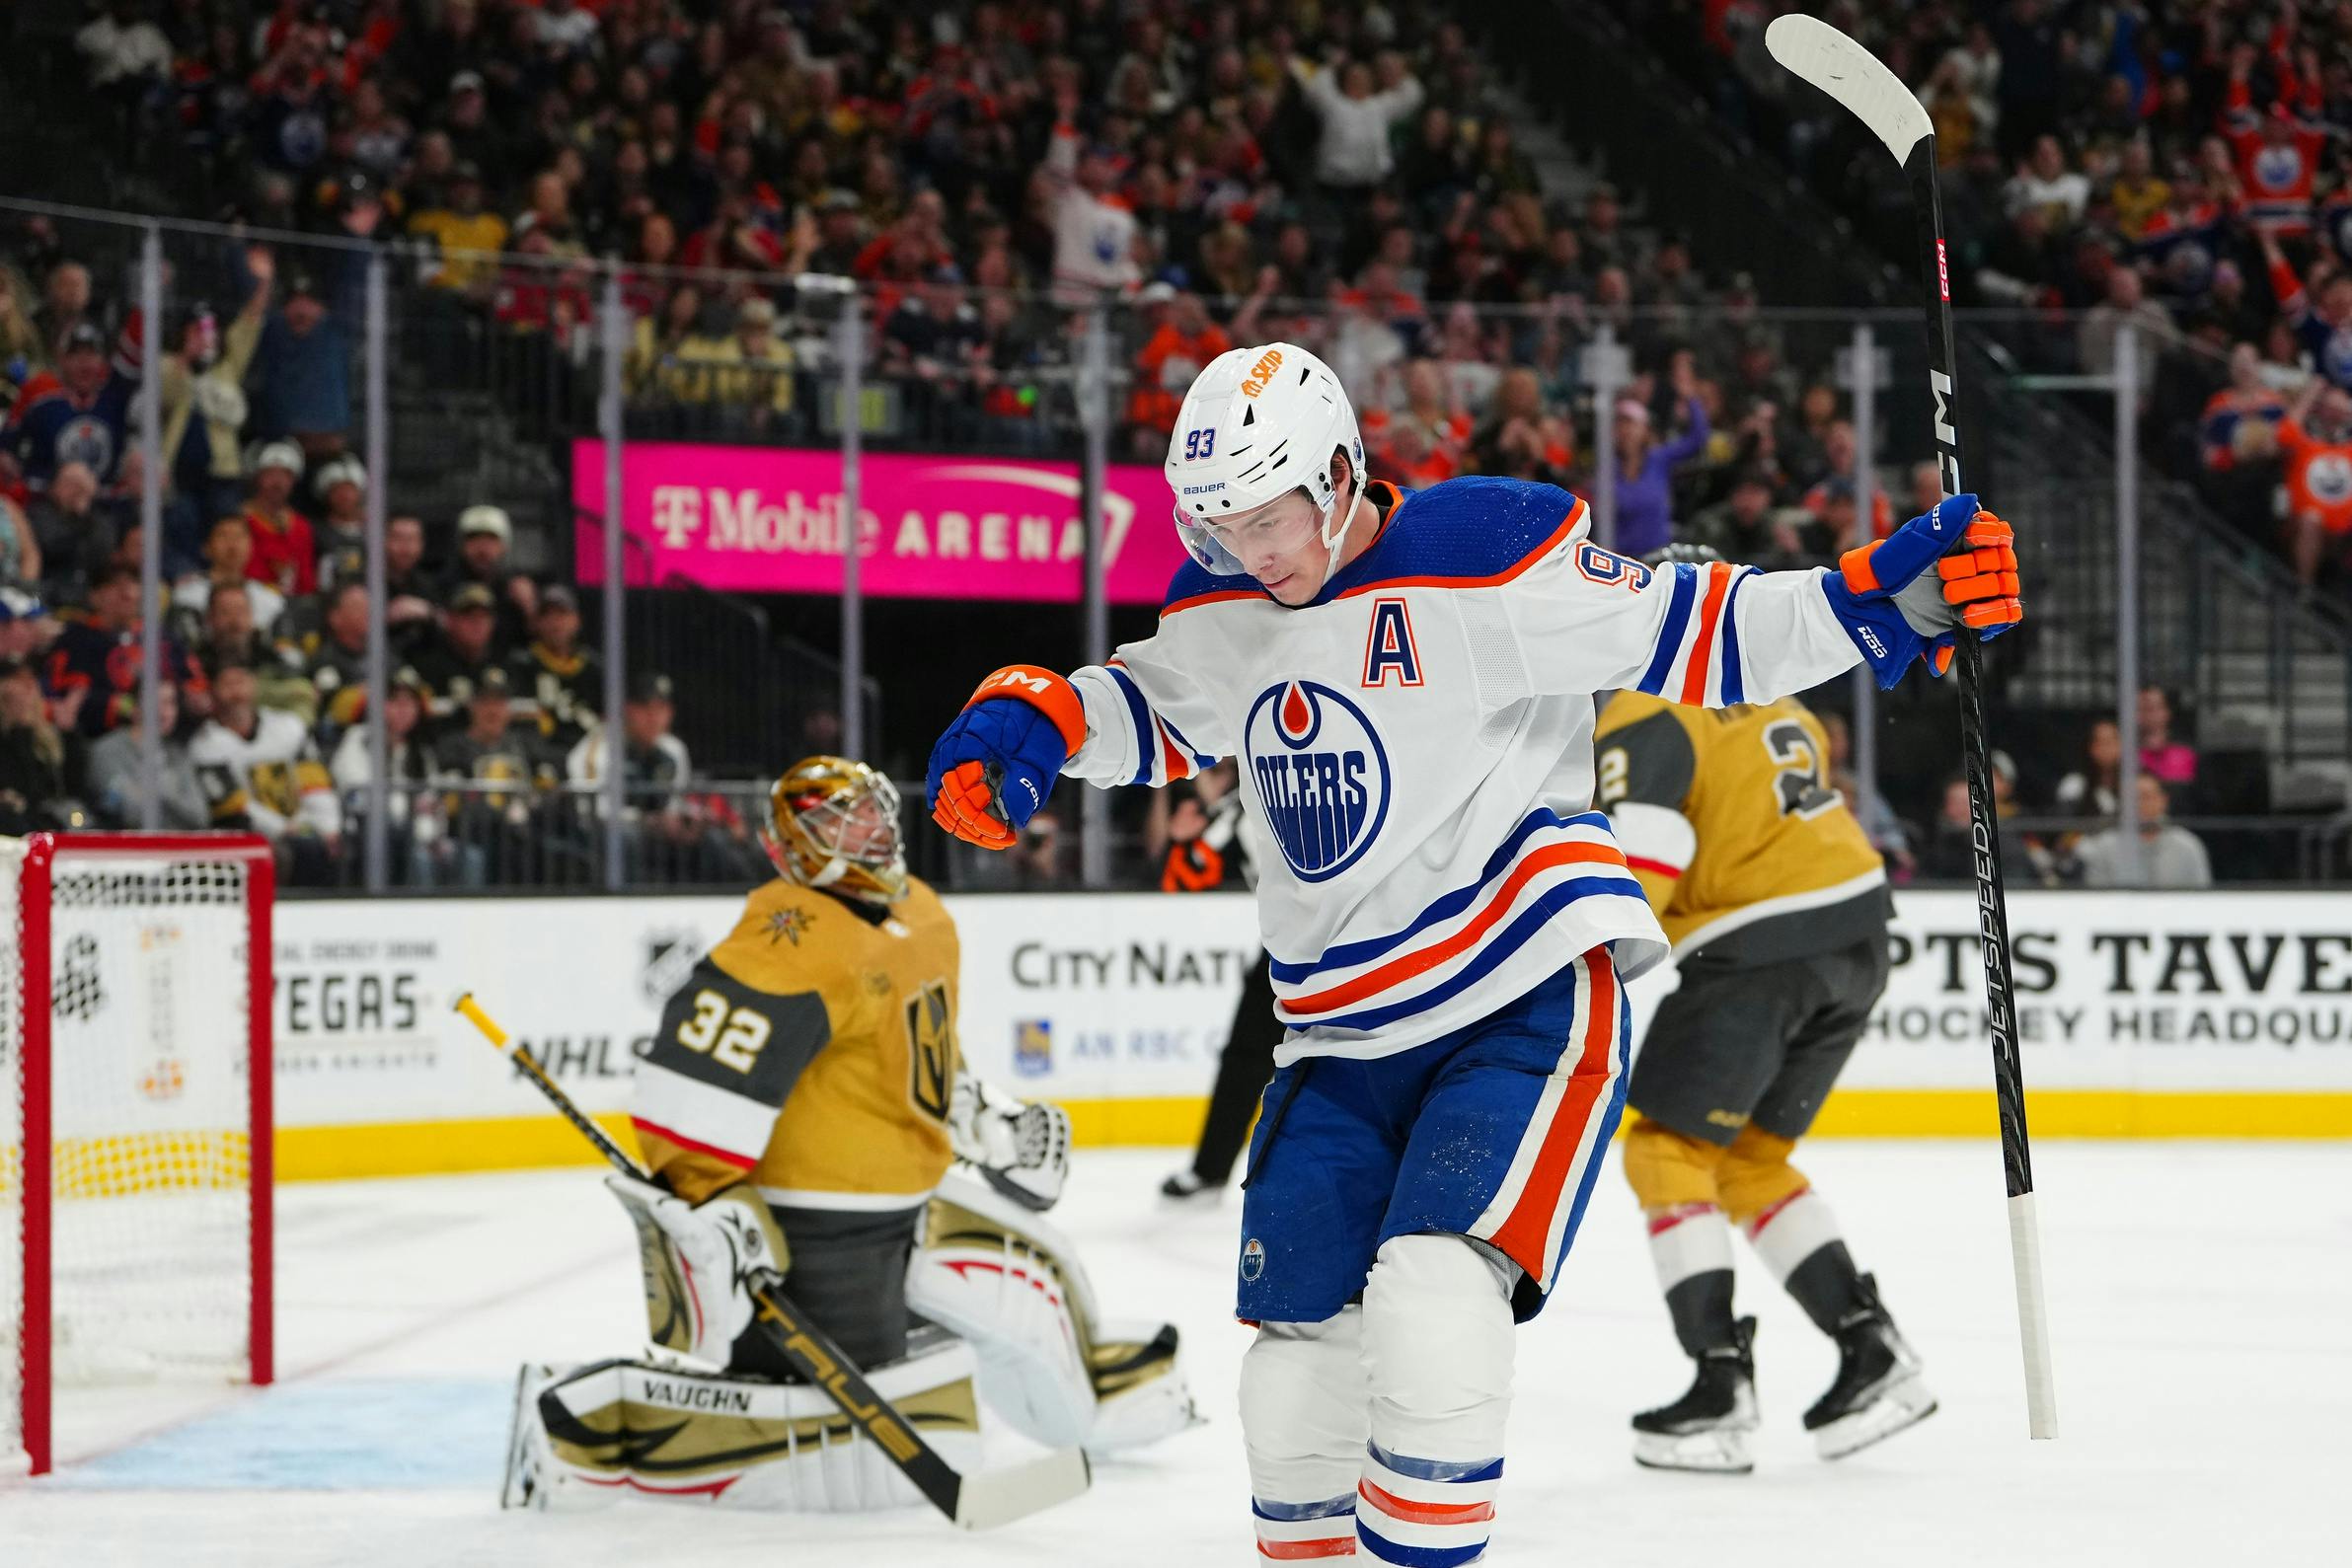 Jack Campbell says his play since joining Oilers has been 'pathetic